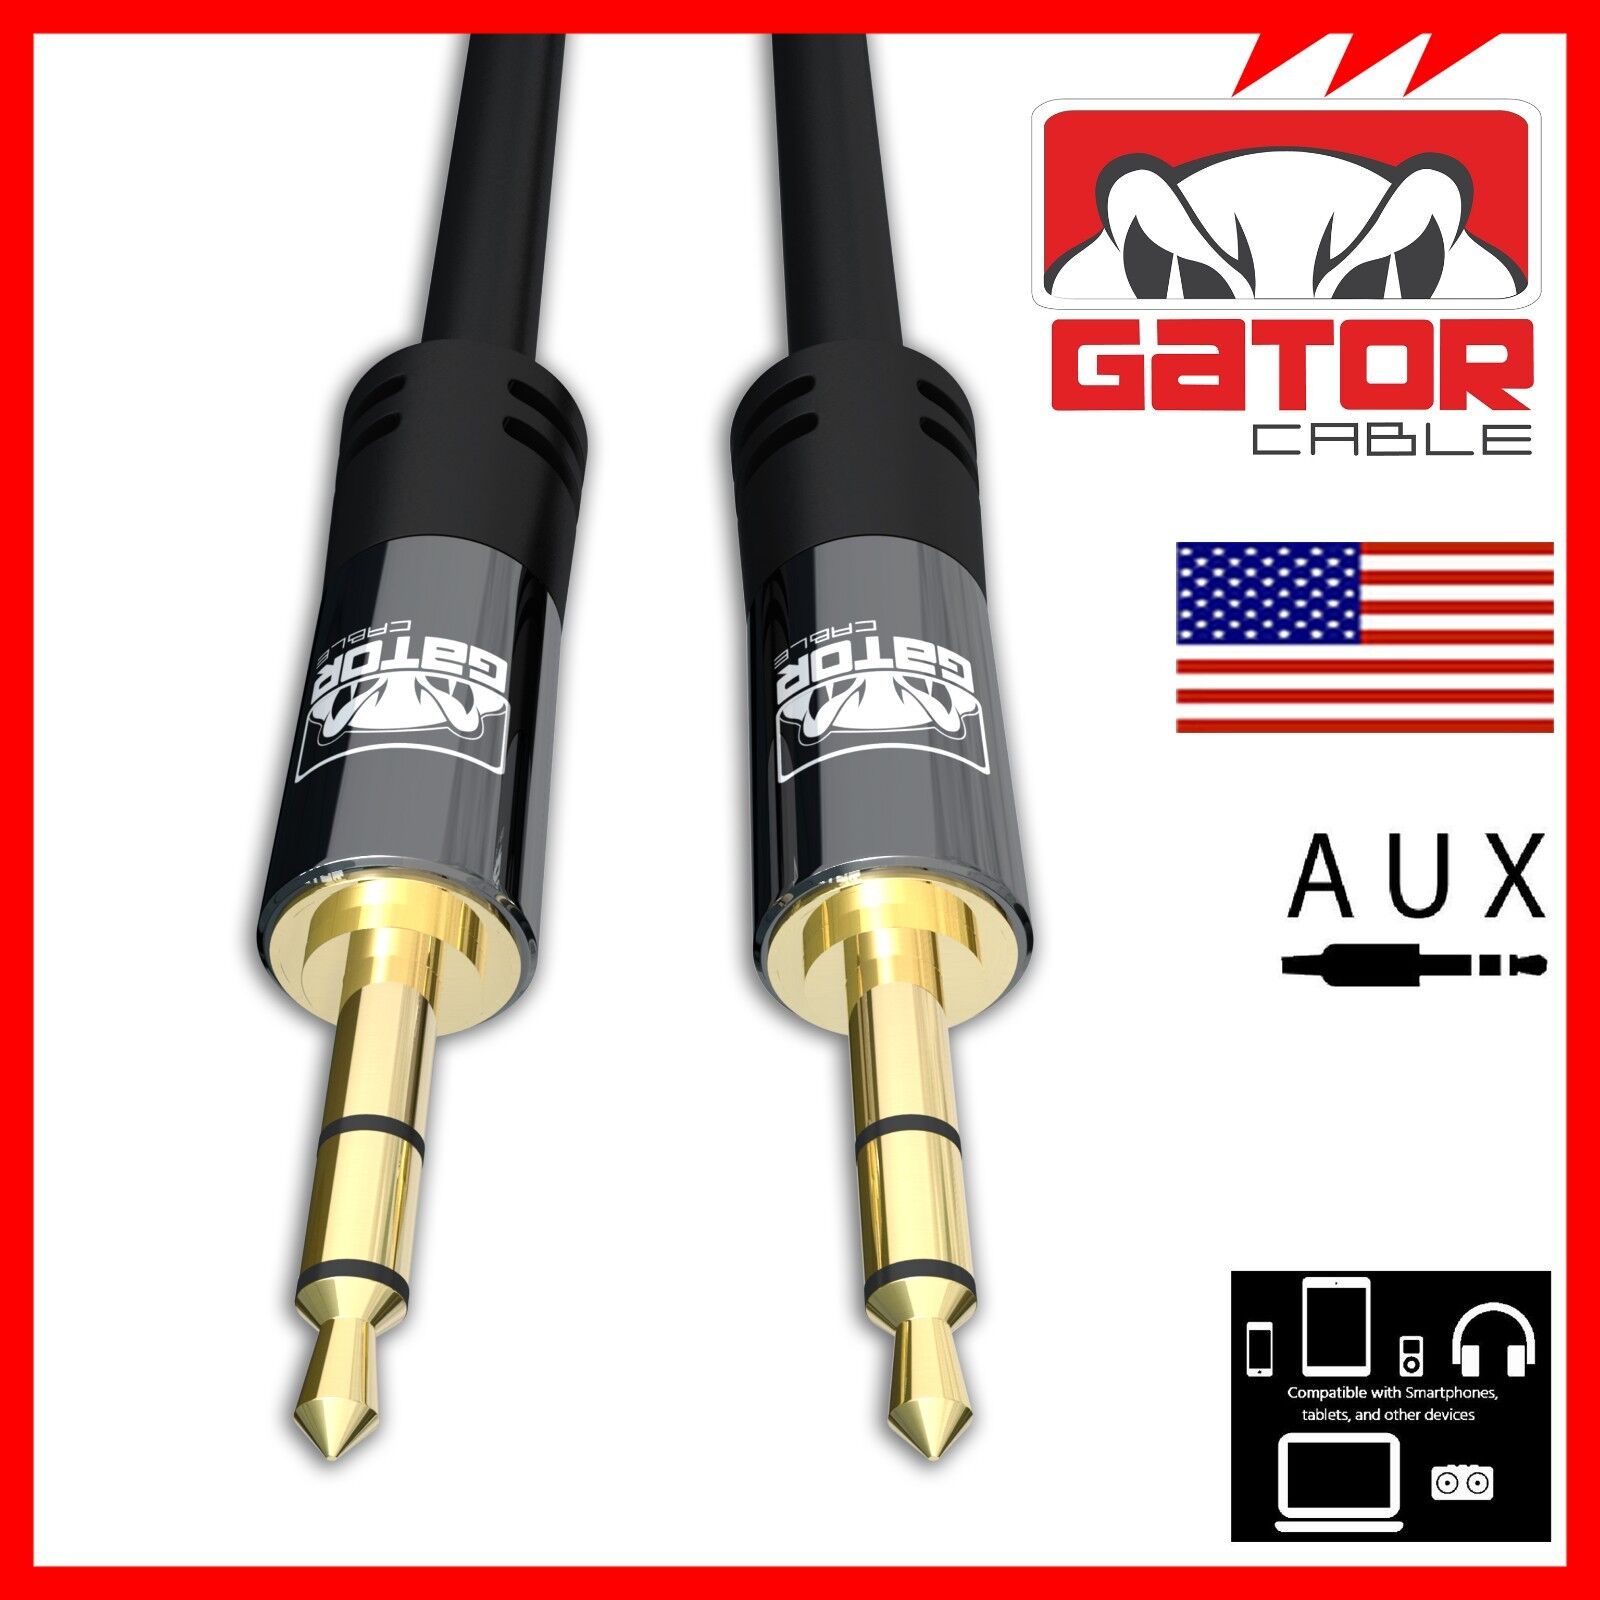 AUX 3.5mm Audio Cable Cord Male to Male For Phone iPhone Samsung LG Earphones Gator Cable AUX-3.5mm-Male-to-Male - фотография #12